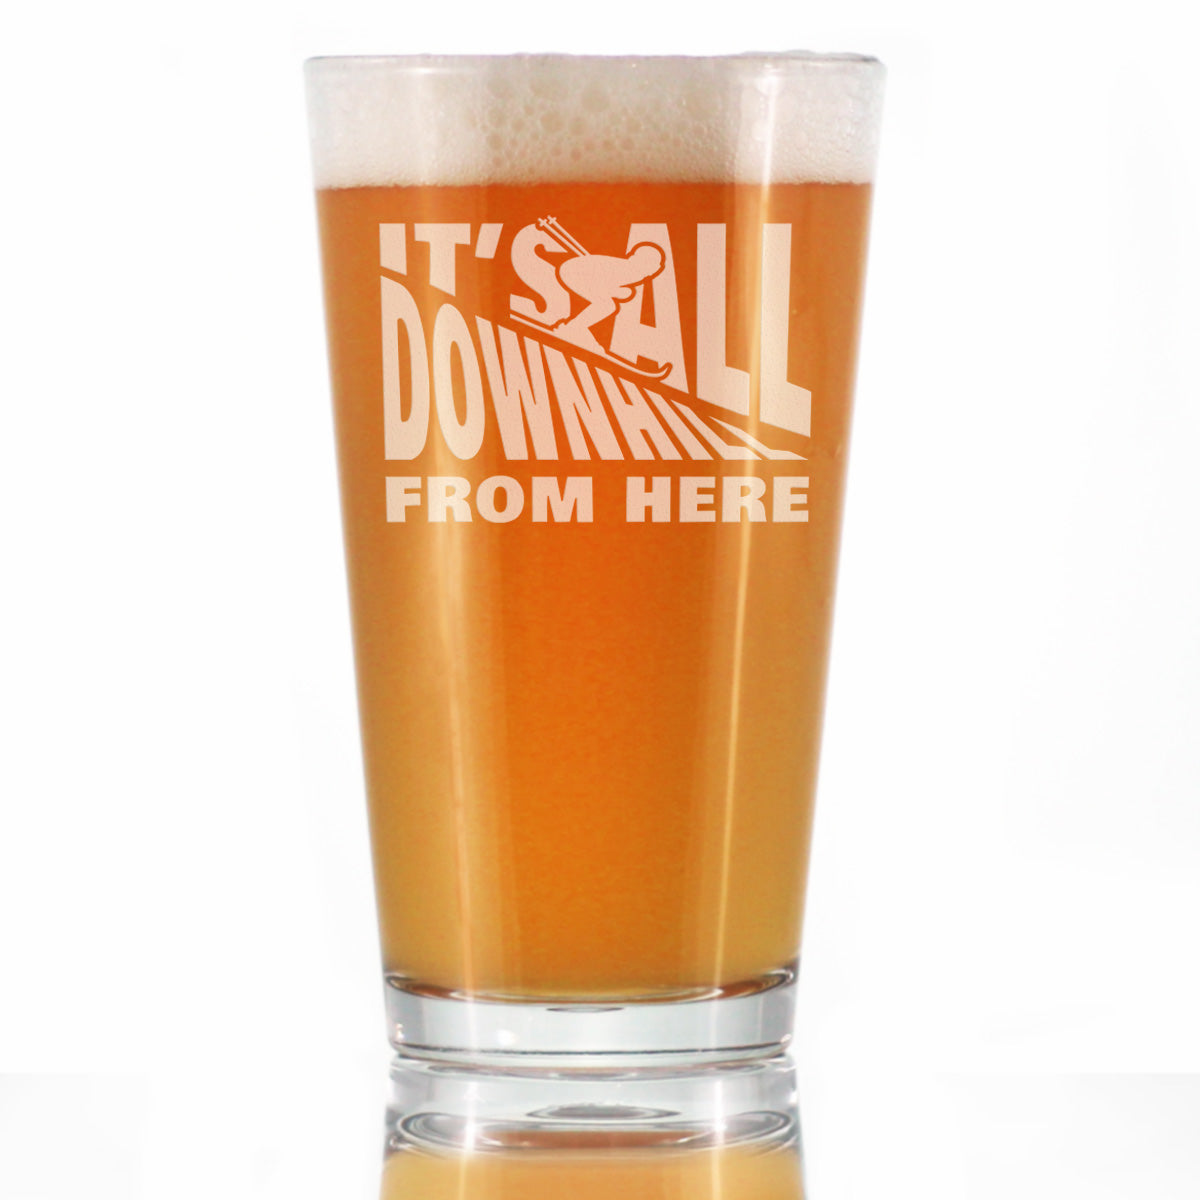 It's All Downhill From Here - Pint Glass for Beer - Unique Skiing Themed Decor and Gifts for Mountain Lovers - 16 oz Glasses